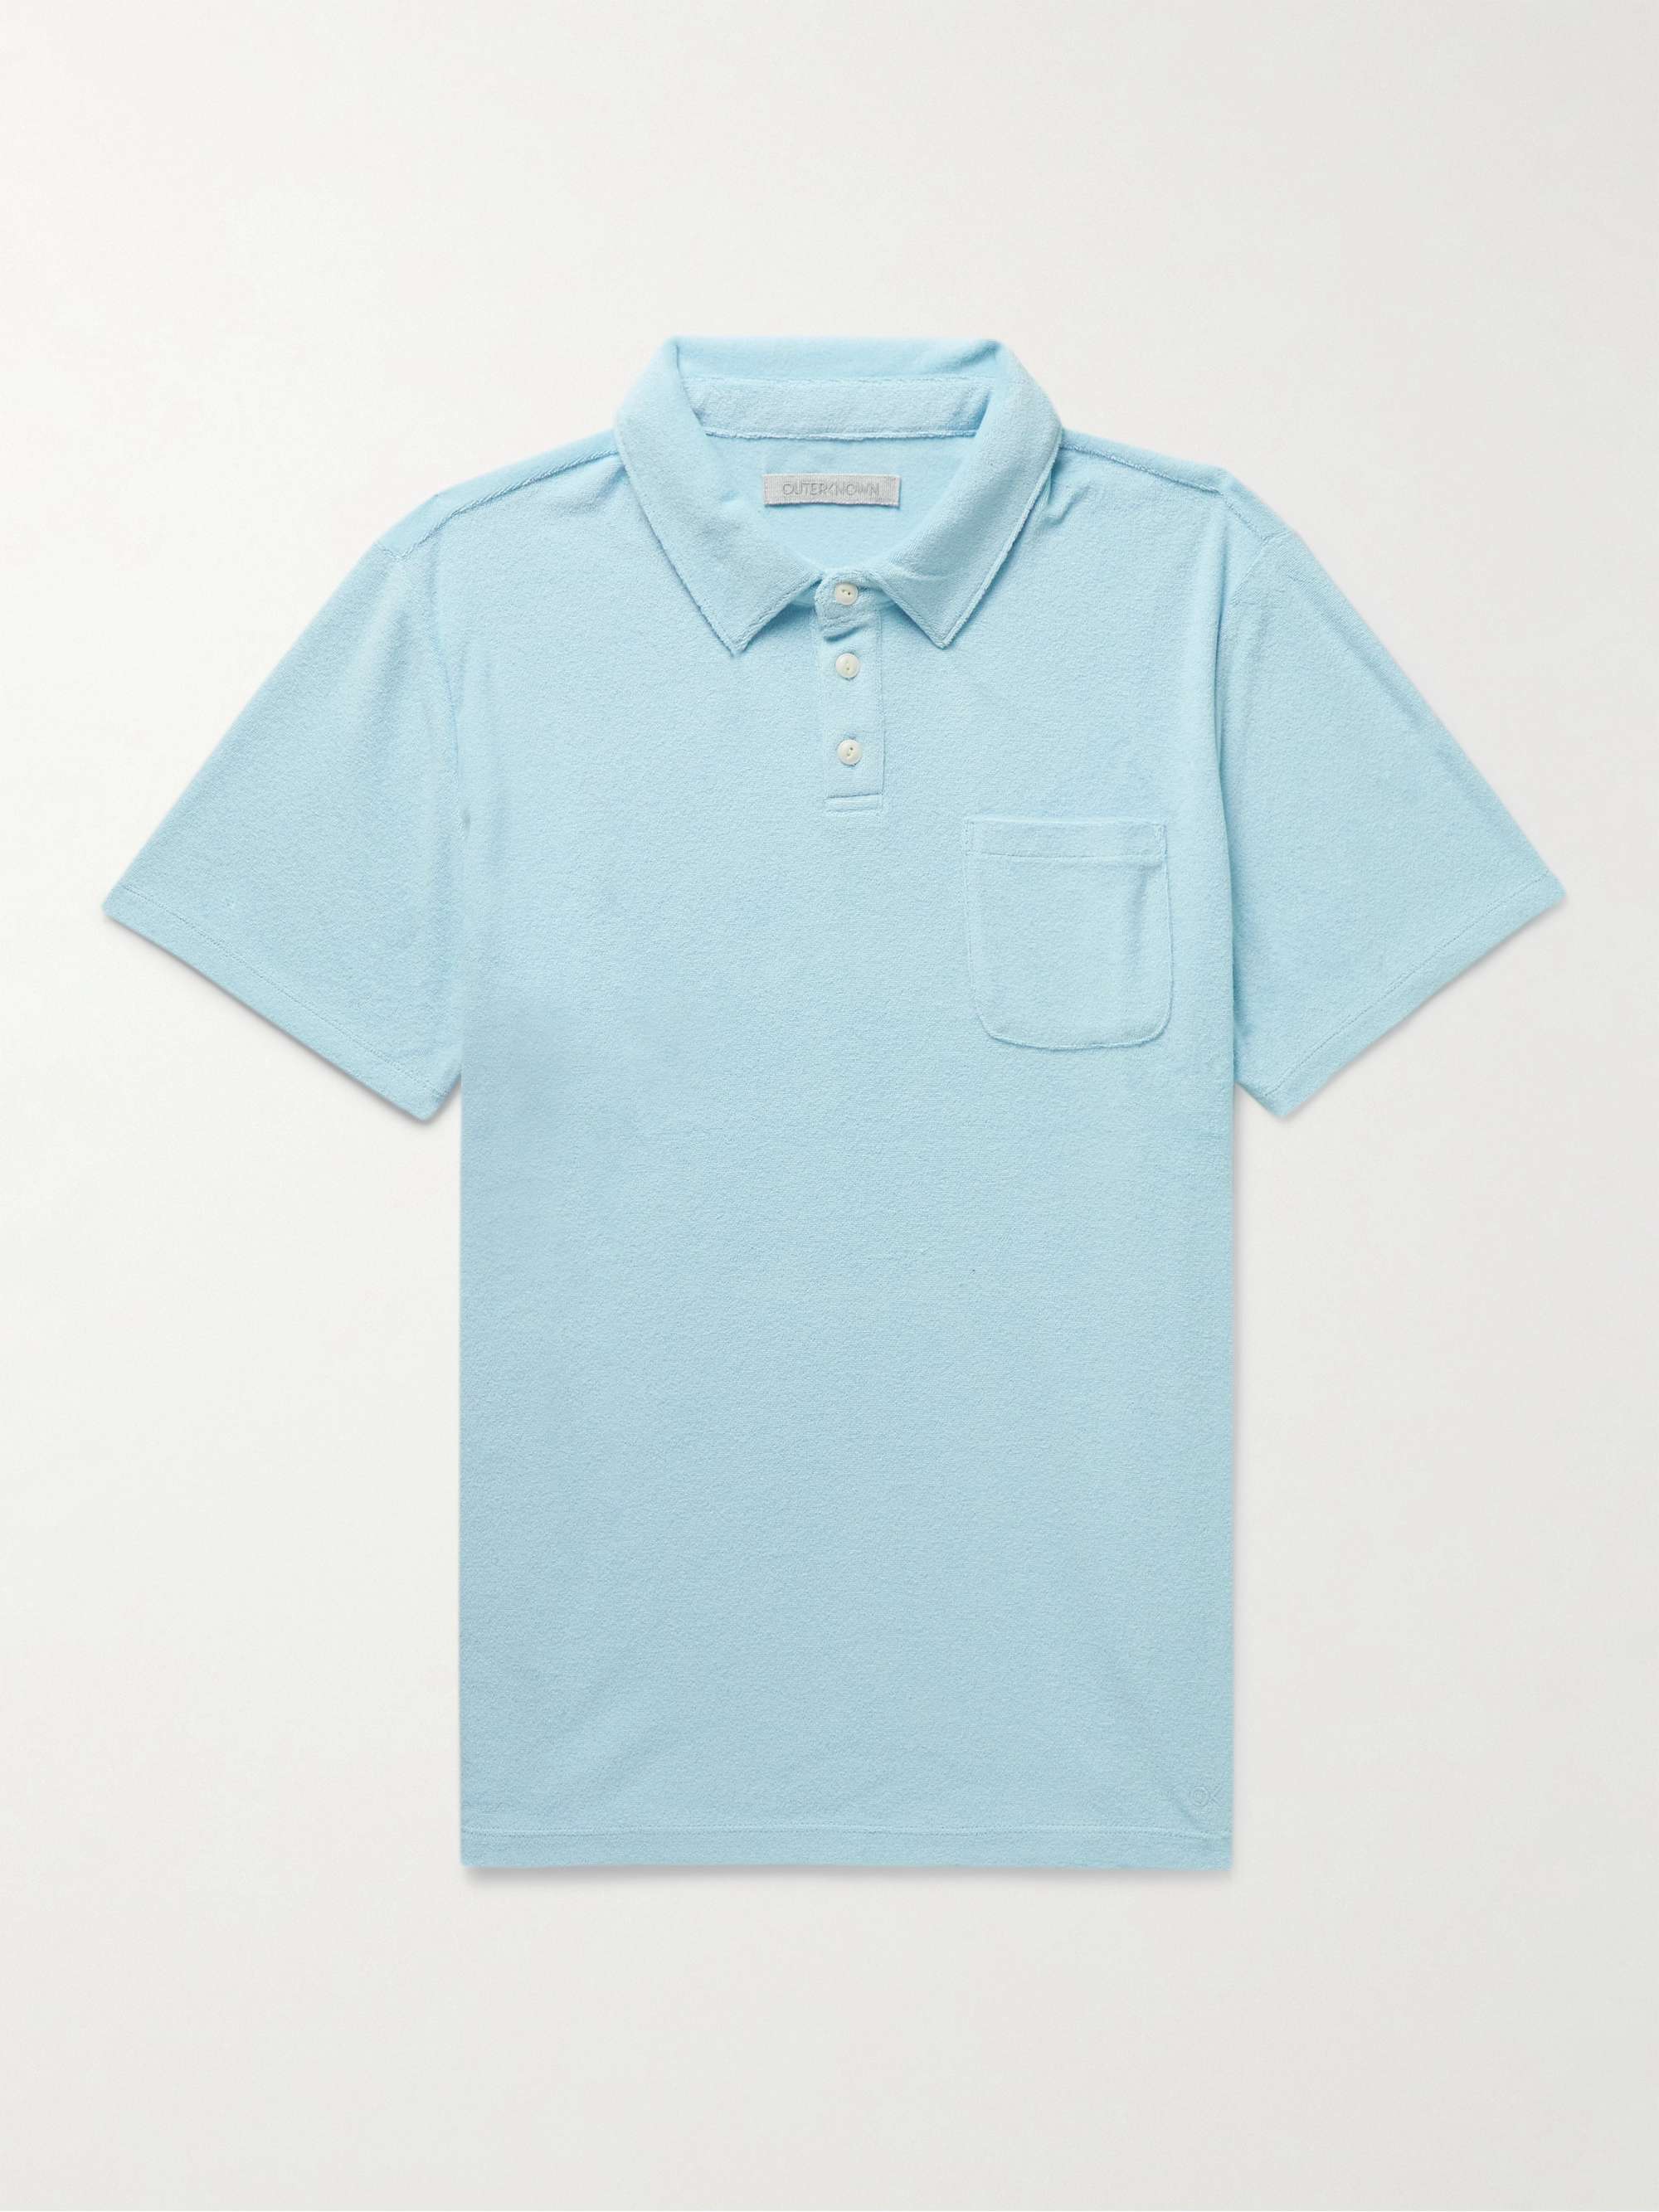 OUTERKNOWN Hightide Organic Cotton-Blend Terry Polo Shirt for Men | MR ...